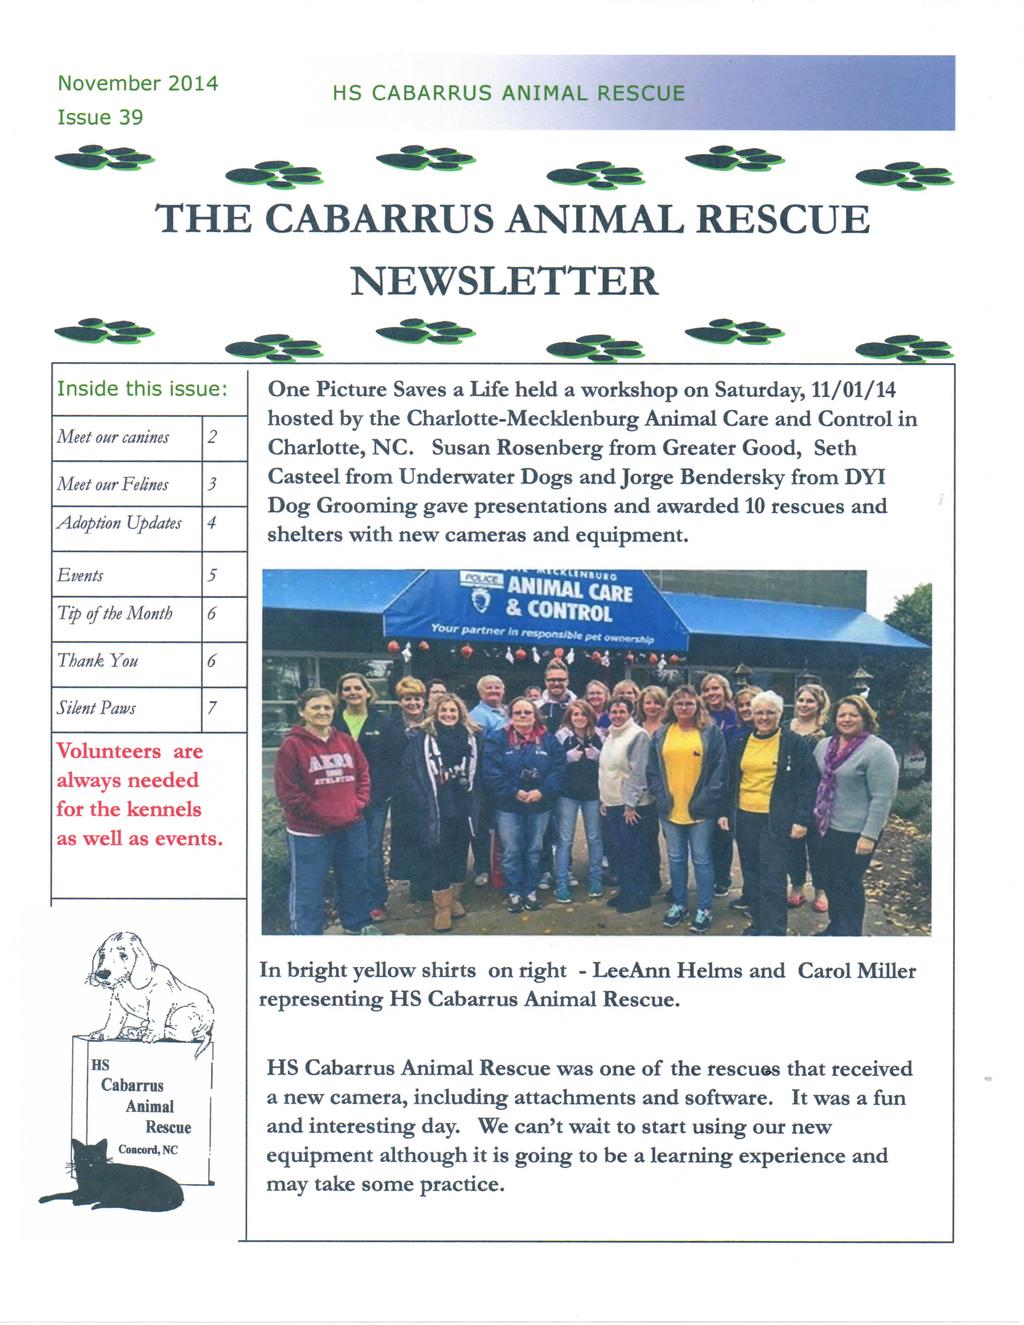 November 2014 Issue 39 HS CABARRUS ANIMAL RESCUE THE CABARRUS ANIMAL RESCUE NEWSLETTER Inside this issue: Meet our canines 2 Meet our Felines 3 Adoption Updates 4 Events 5 Tip of the Month 6 Thank